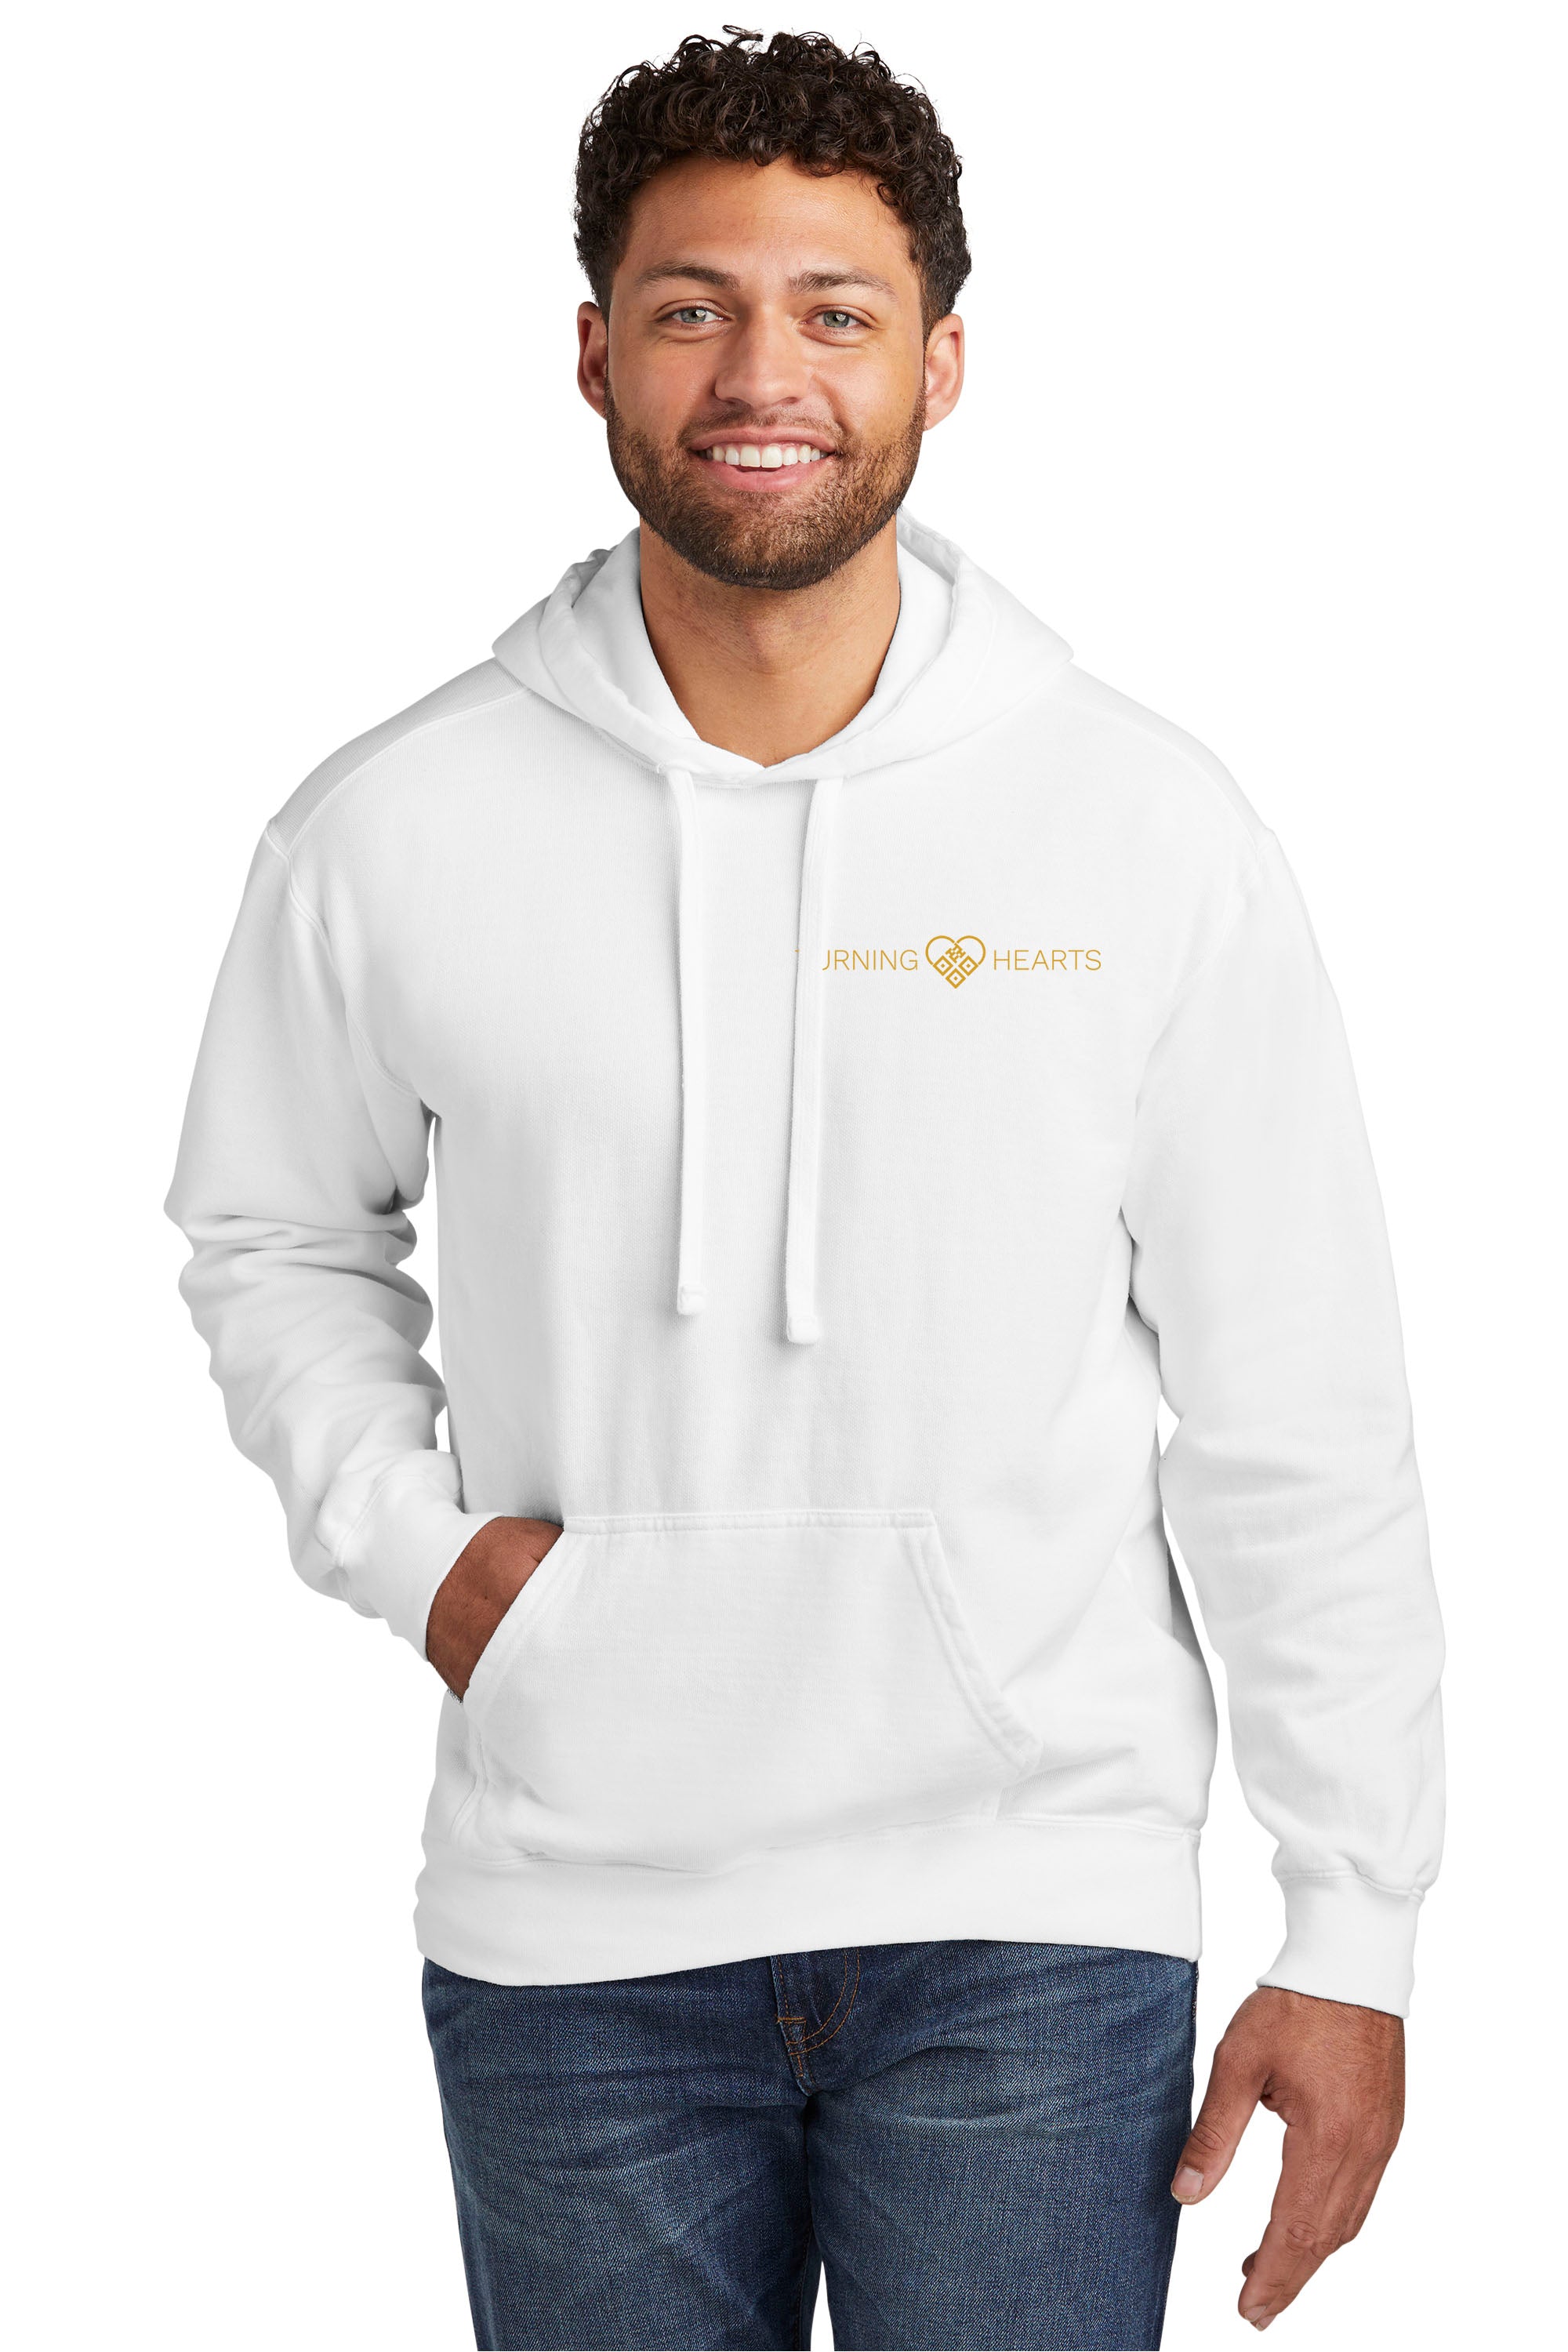 Turning Hearts -"We Remember"- Pullover Hoodie